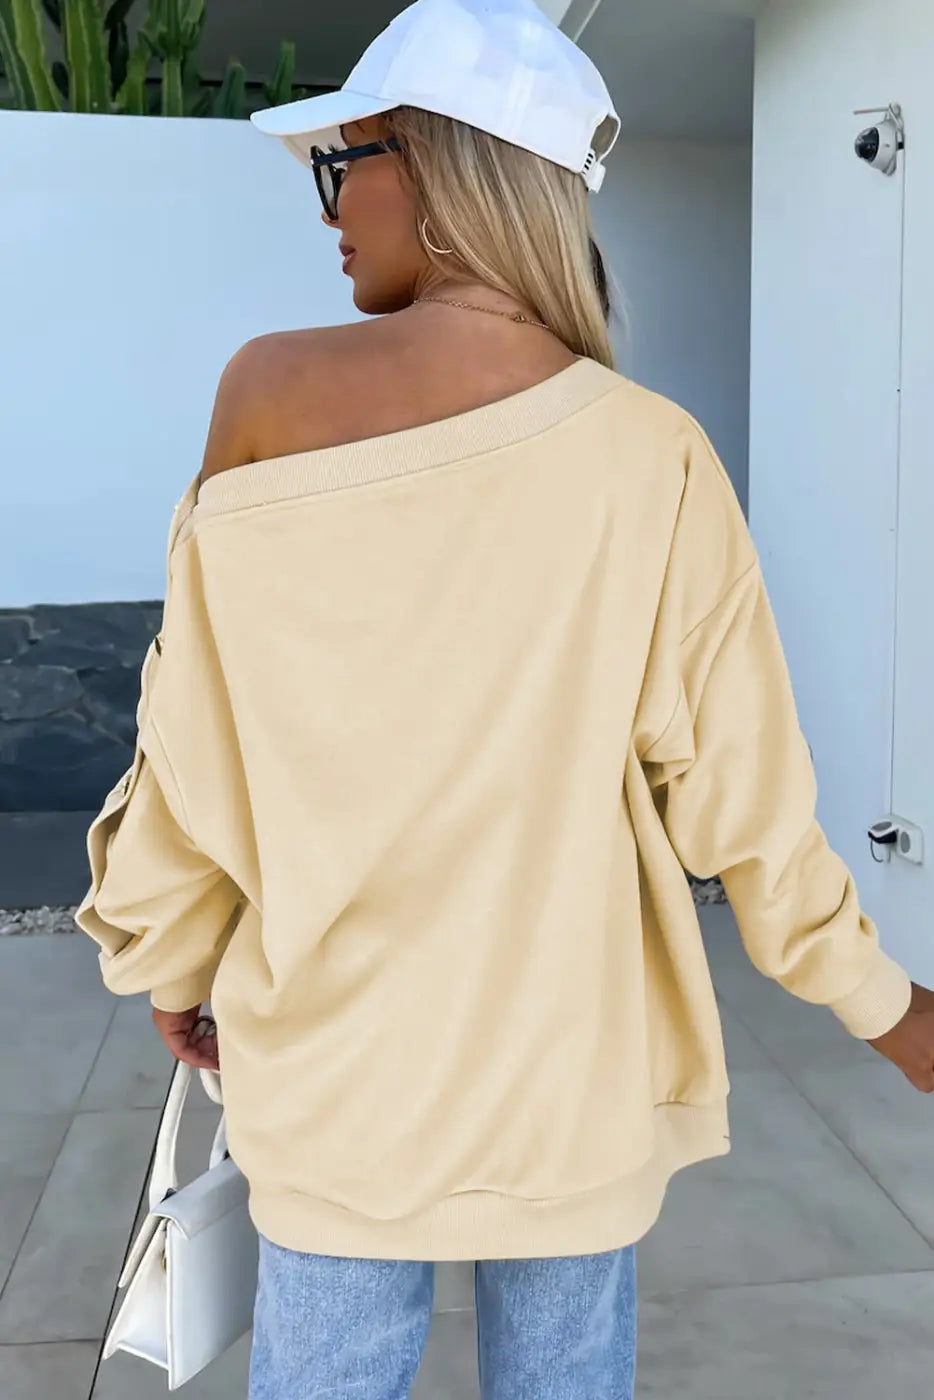 Off-shoulder pale yellow relaxed fit sweater worn with a white baseball cap and blue jeans